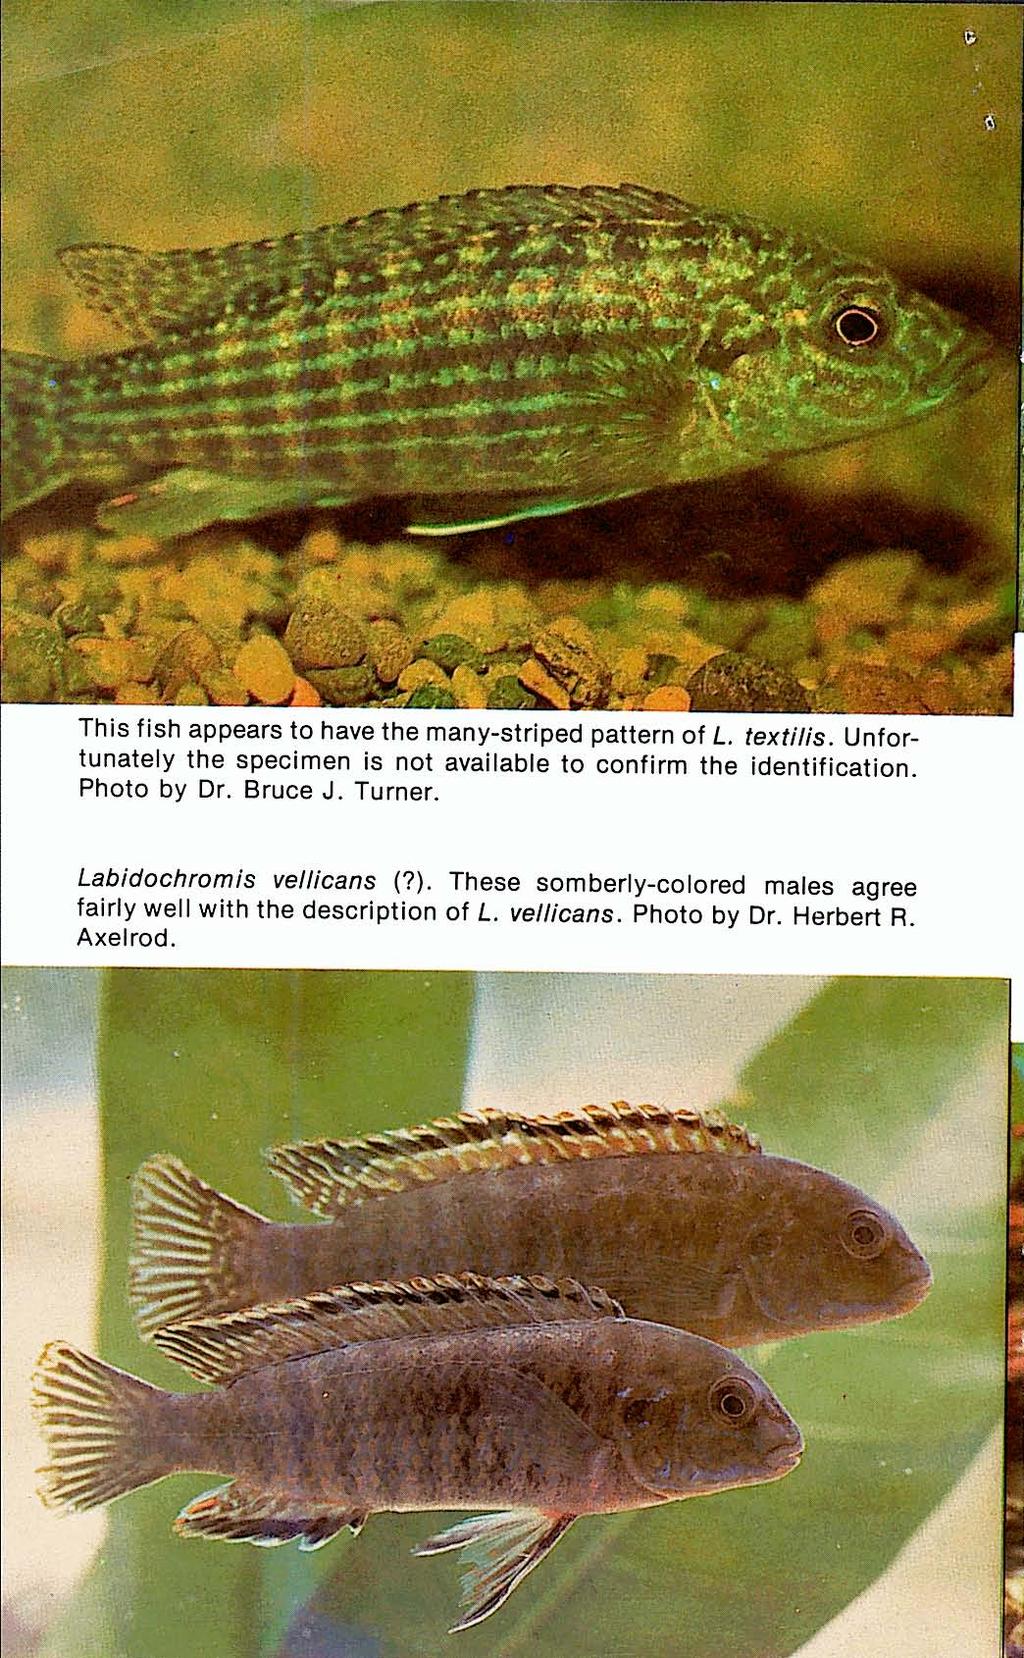 This fish appears to have the many-striped pattern of L. textilis. Unfortunately the specimen is not available to confirm the identification. Photo by Dr.